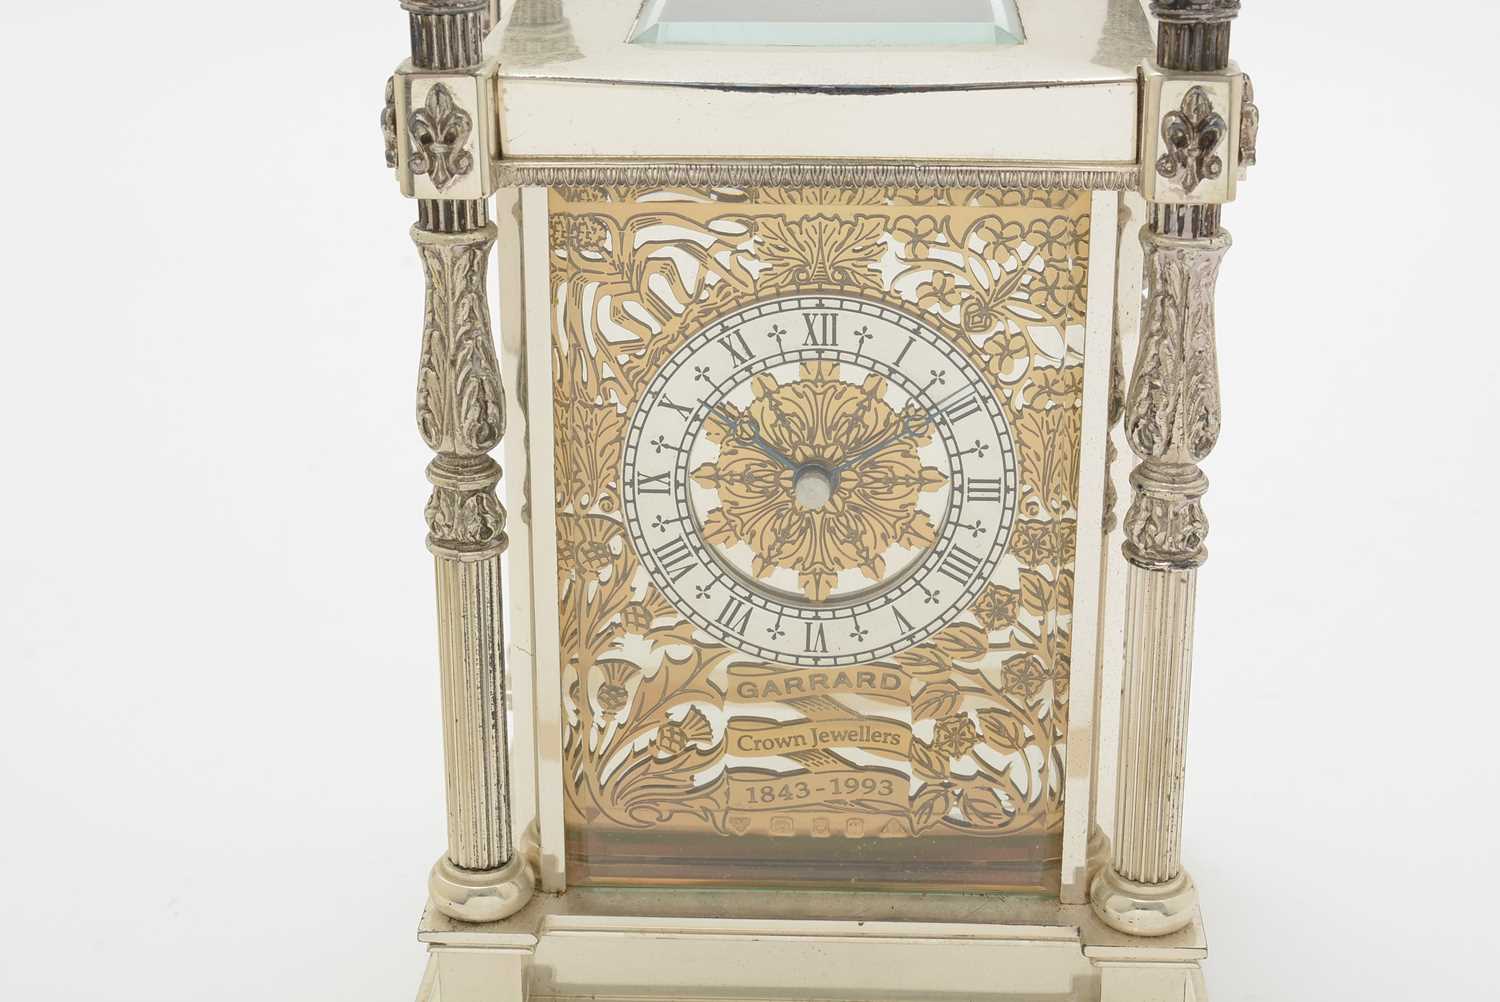 'The Canopy Clock': a large silver carriage clock, by Garrard, - Image 12 of 16